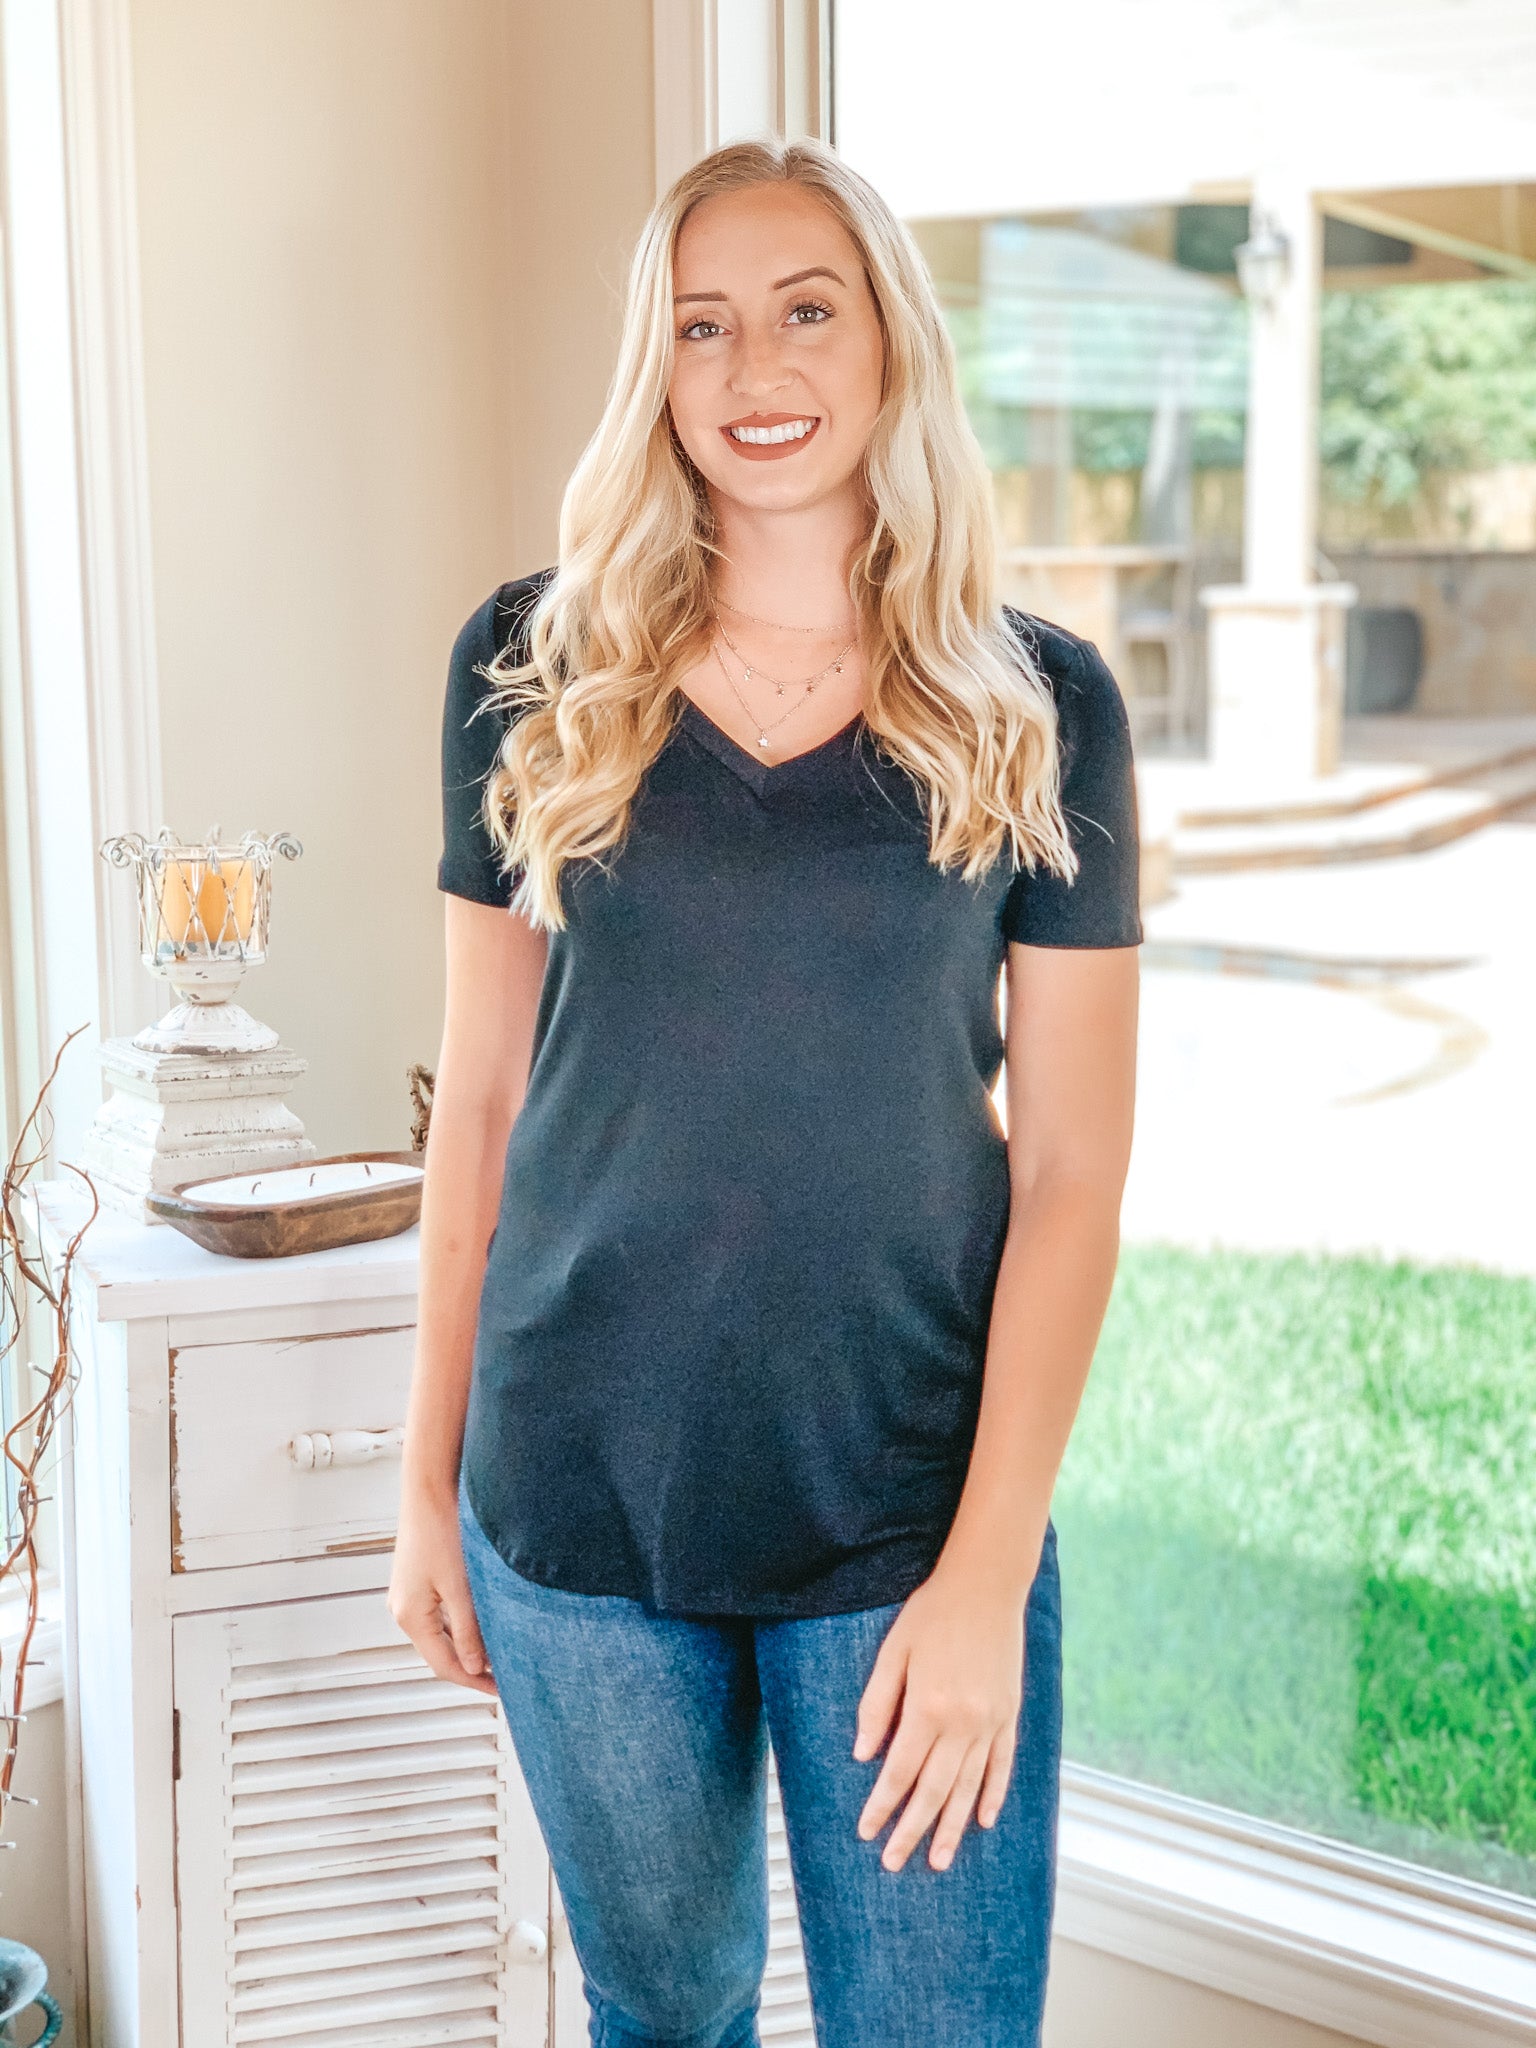 Simply The Best V Neck Short Sleeve Tee Shirt in Black - Giddy Up Glamour Boutique